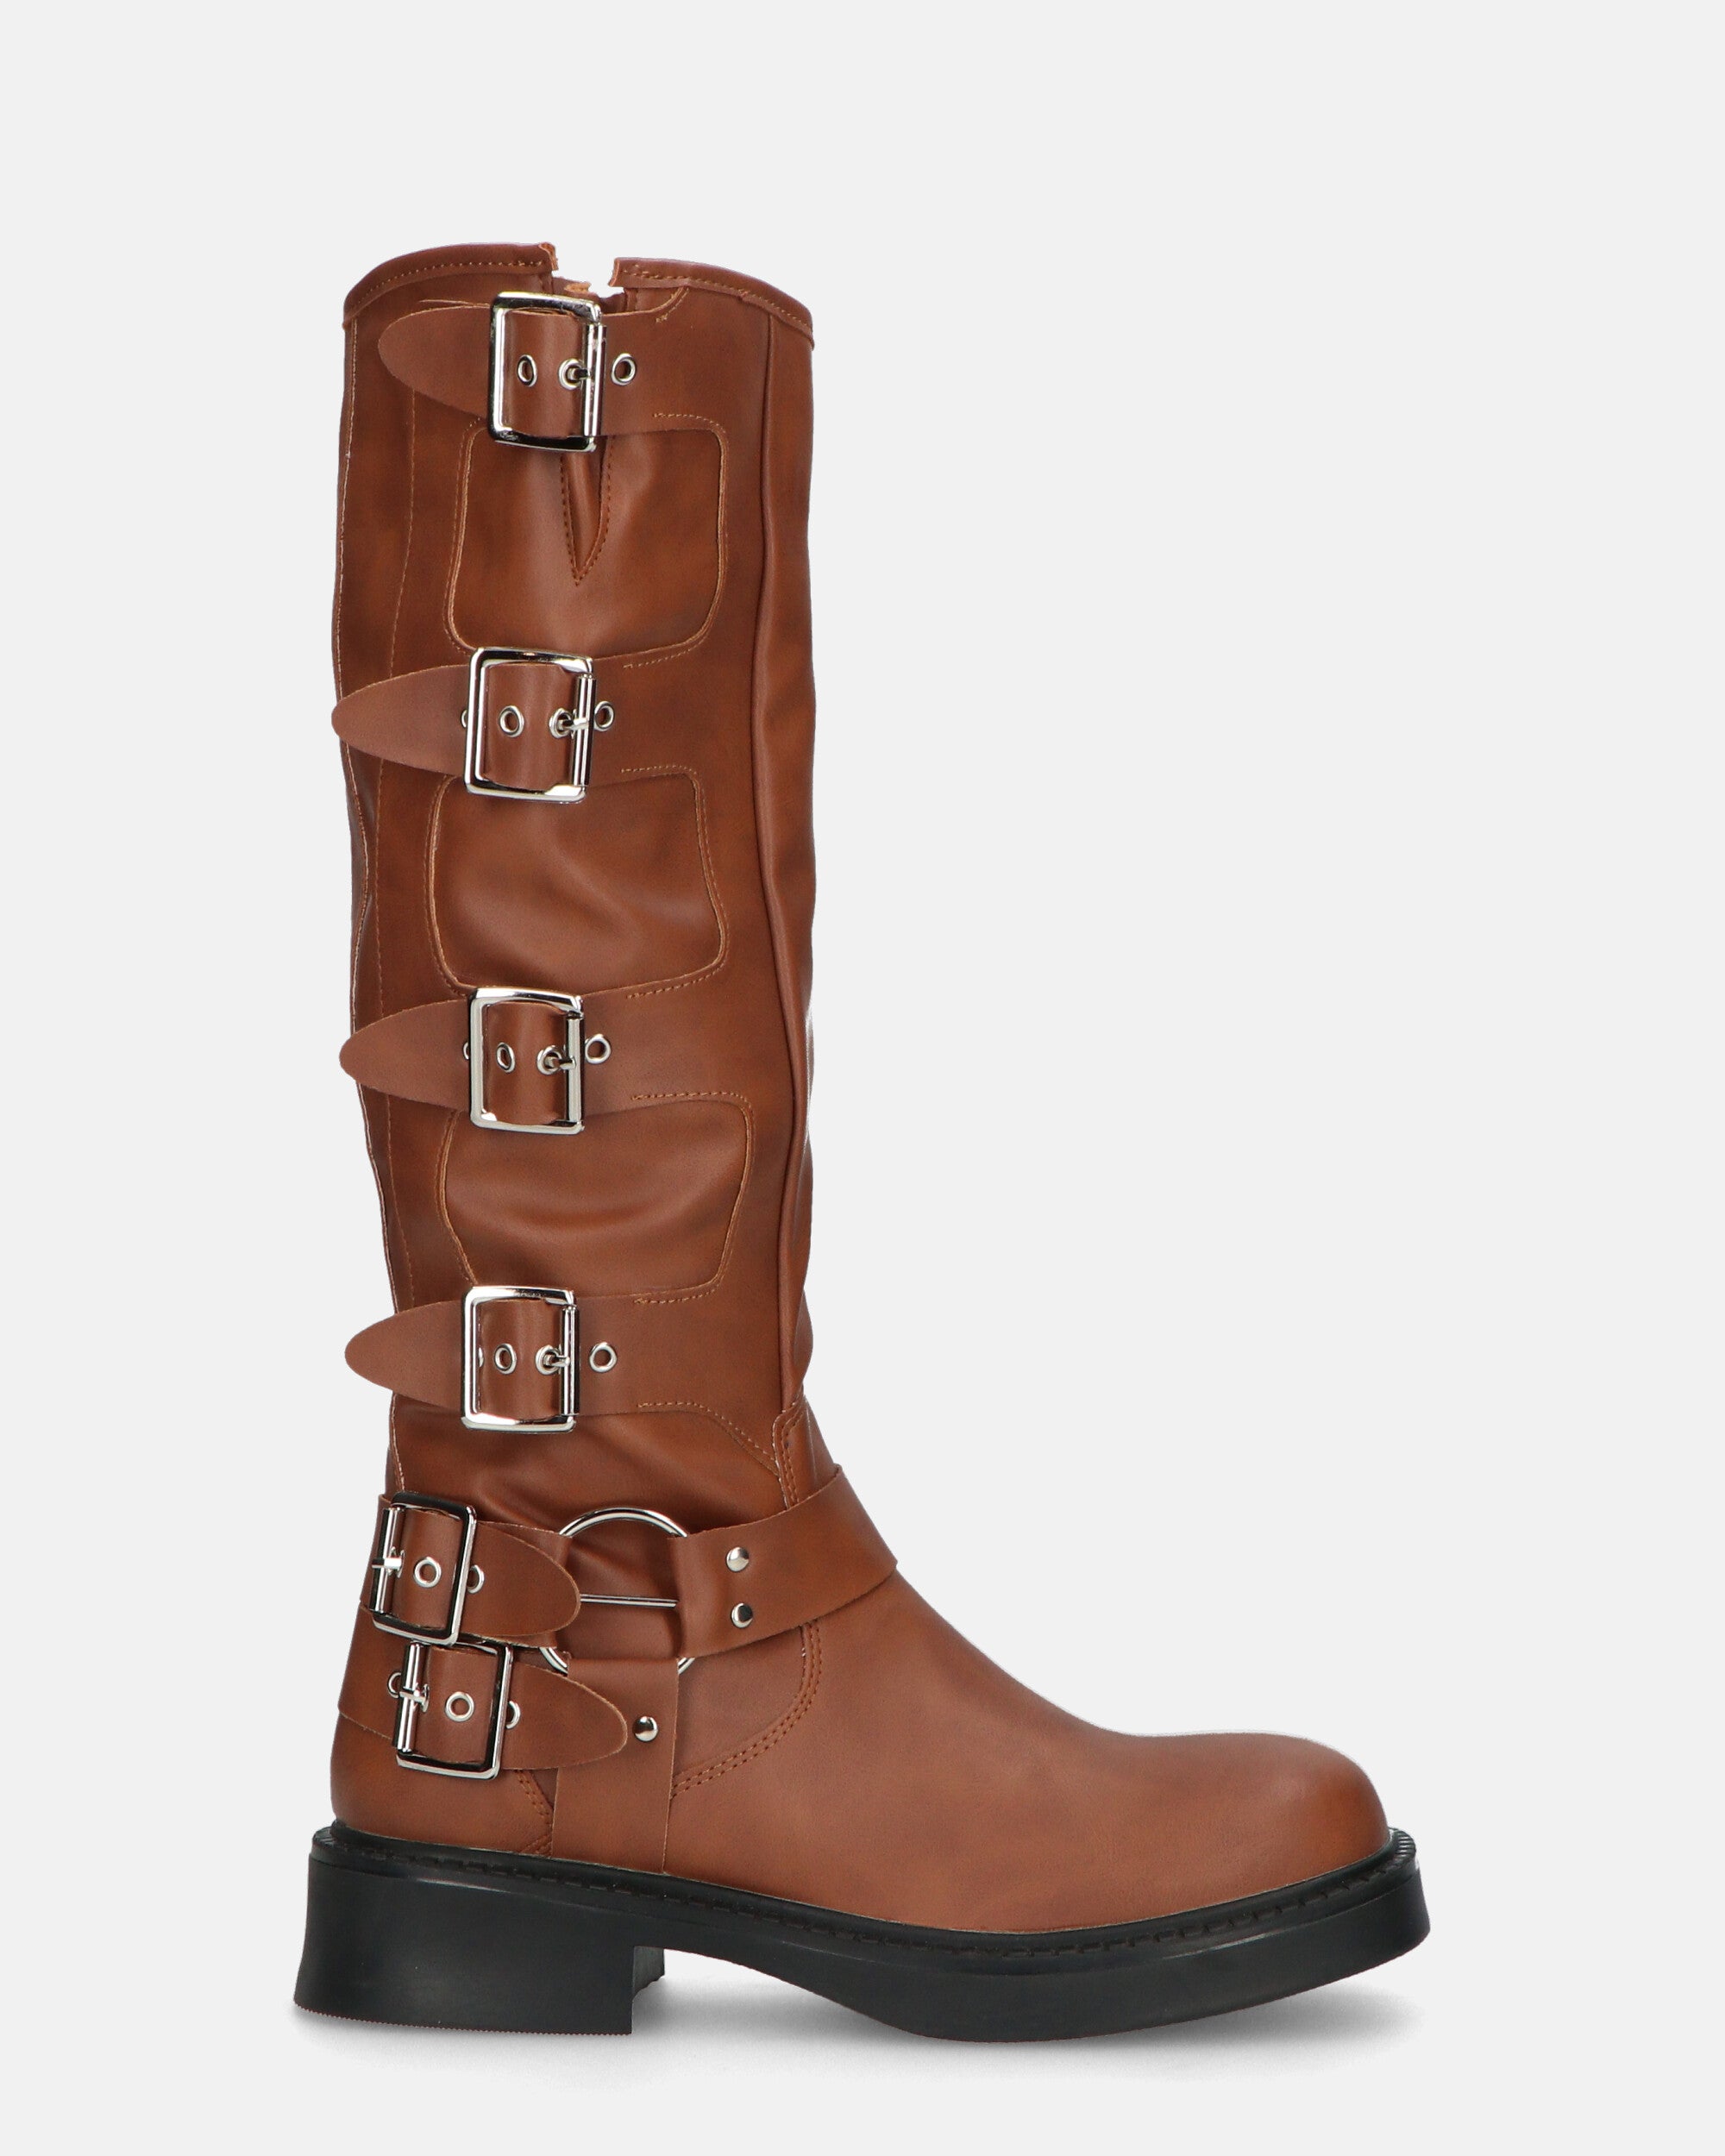 NYX - brown high amphibious boots with straps